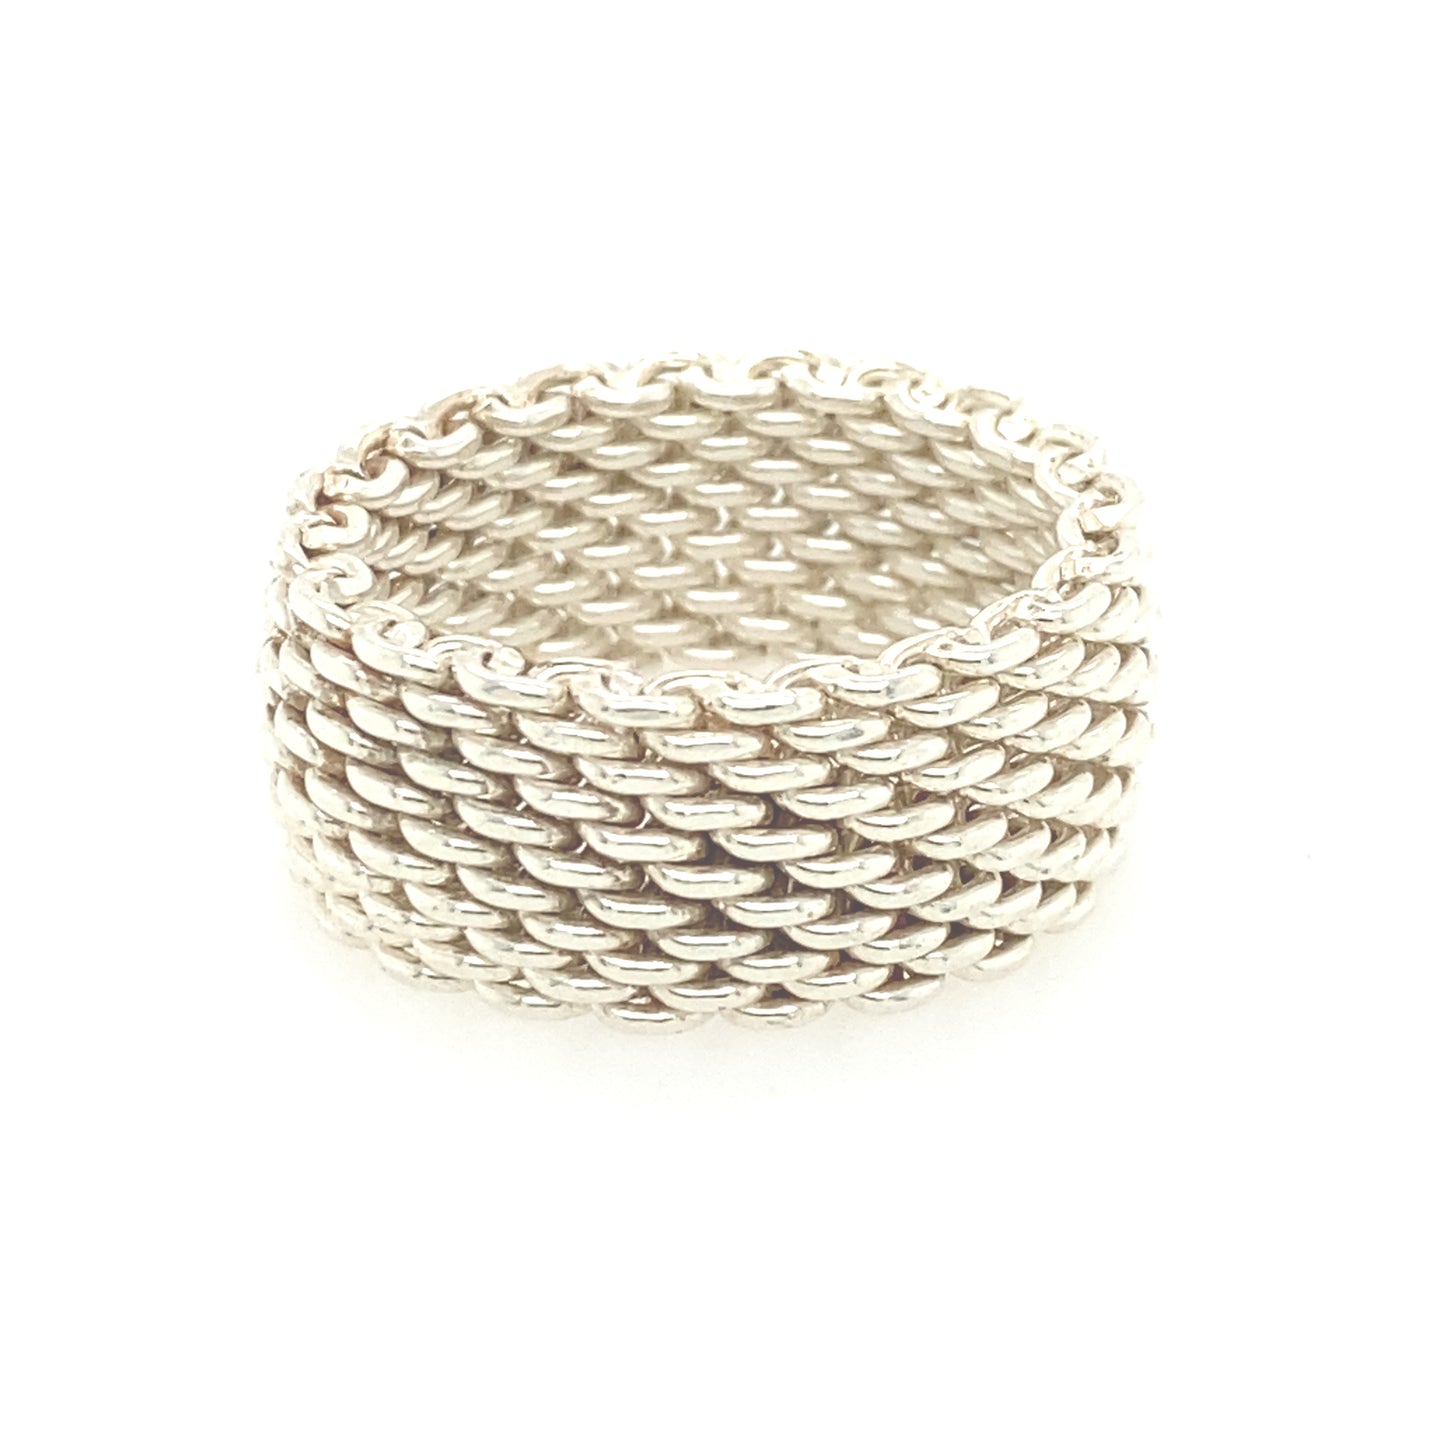 Mesh Somerset Tiffany & Co Sterling Silver Ring